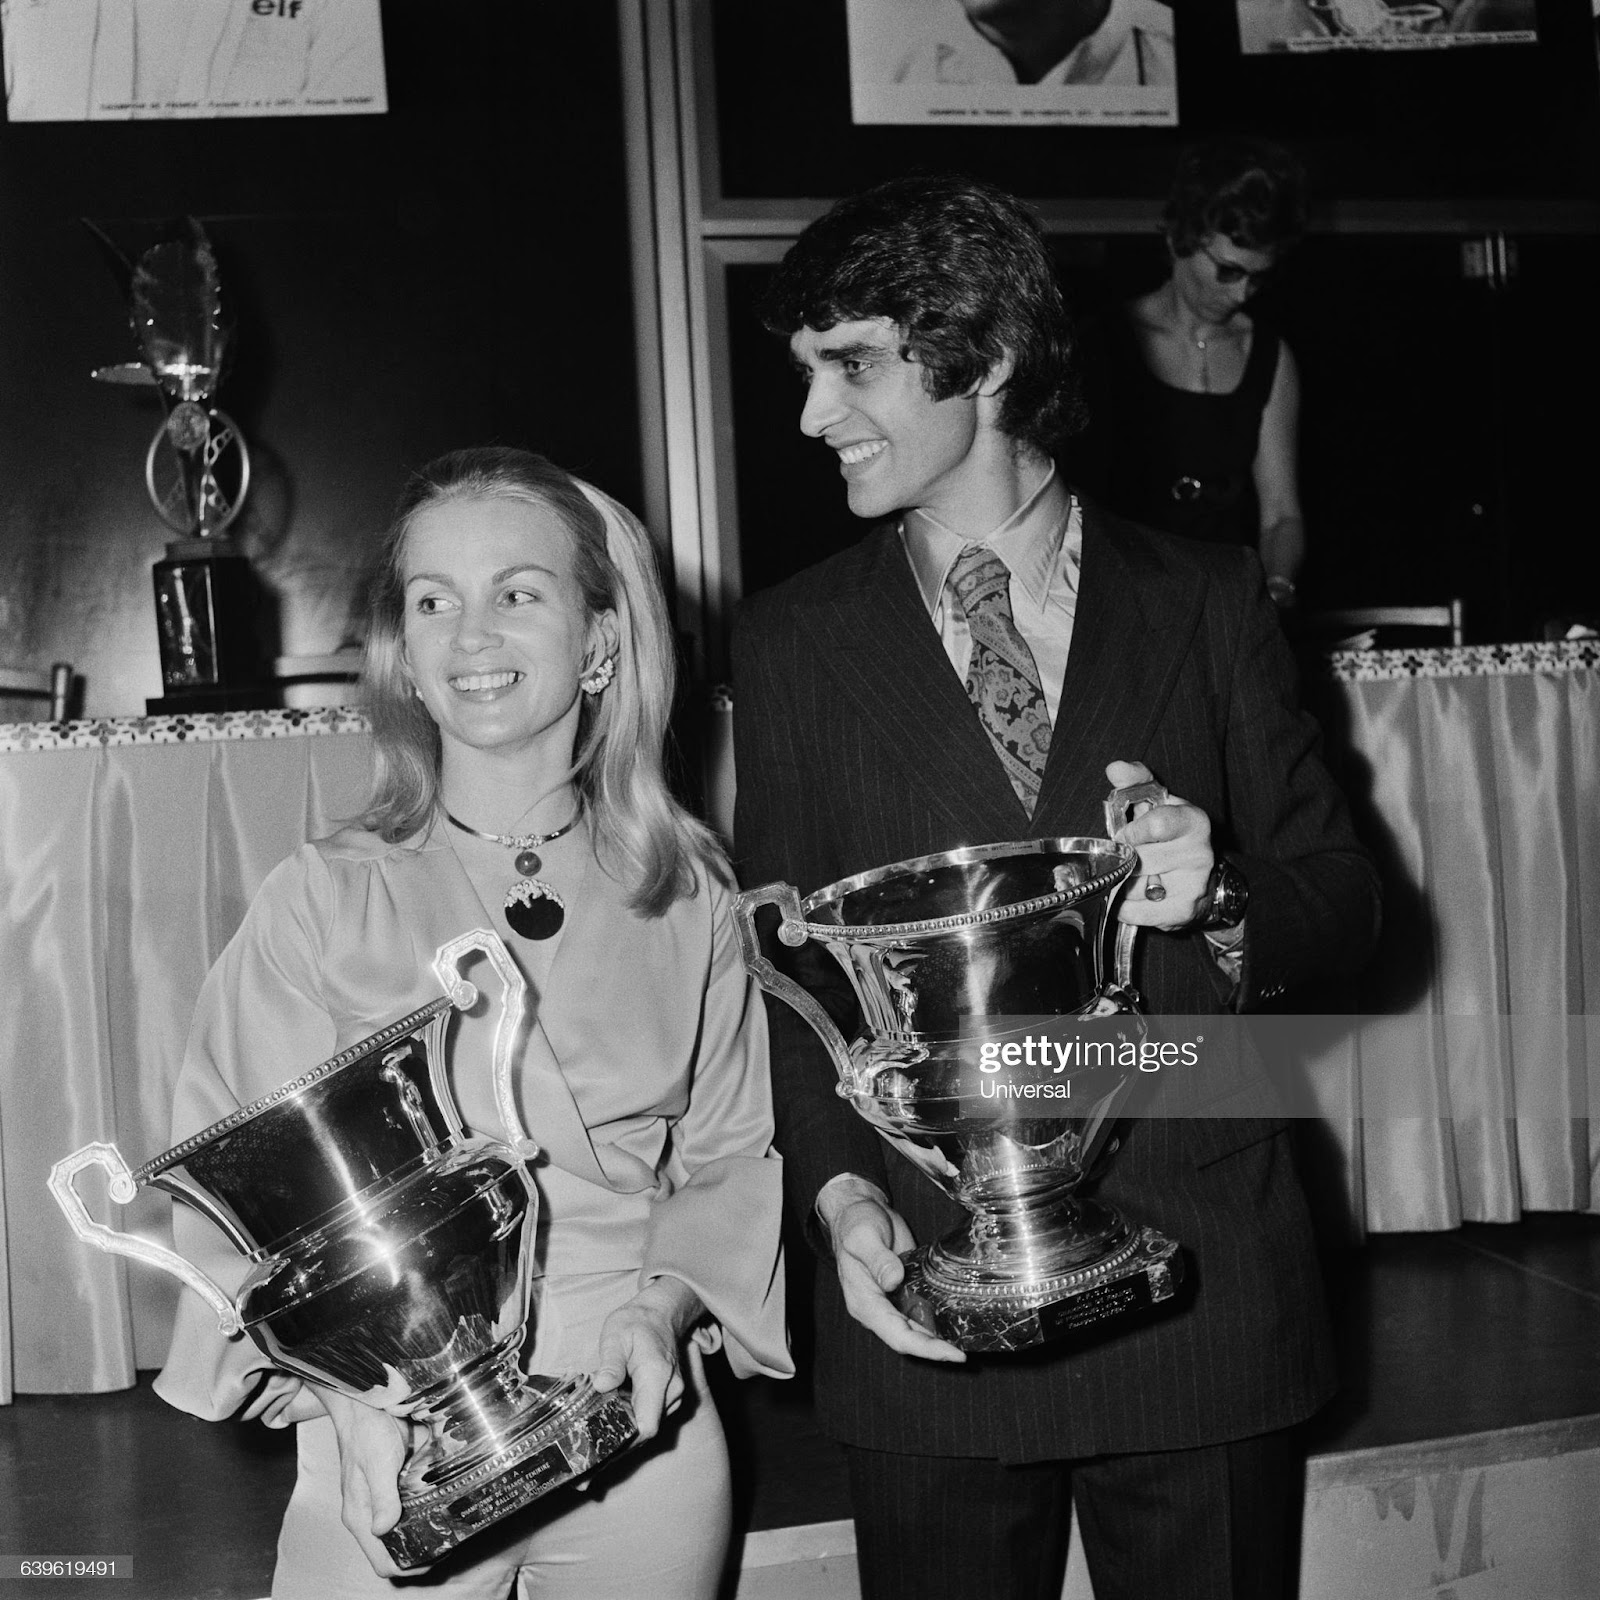 1971 French racecar champions. Female rally champion Marie-Claude Beaumont and Francois Cevert (Formula 1 and 2) on December 13, 1971.